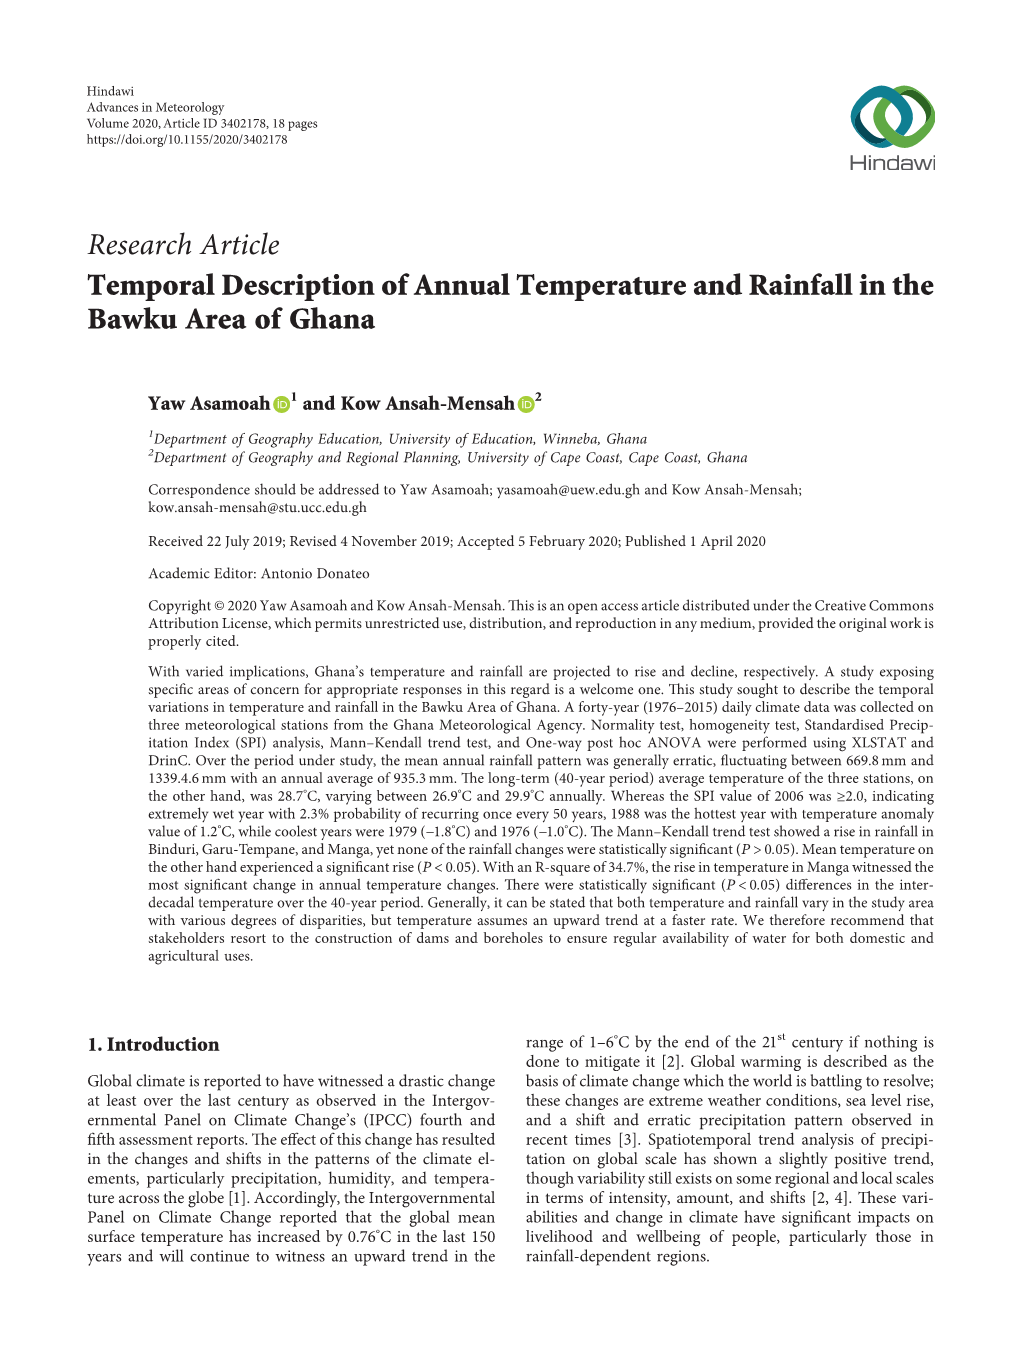 Temporal Description of Annual Temperature and Rainfall in the Bawku Area of Ghana